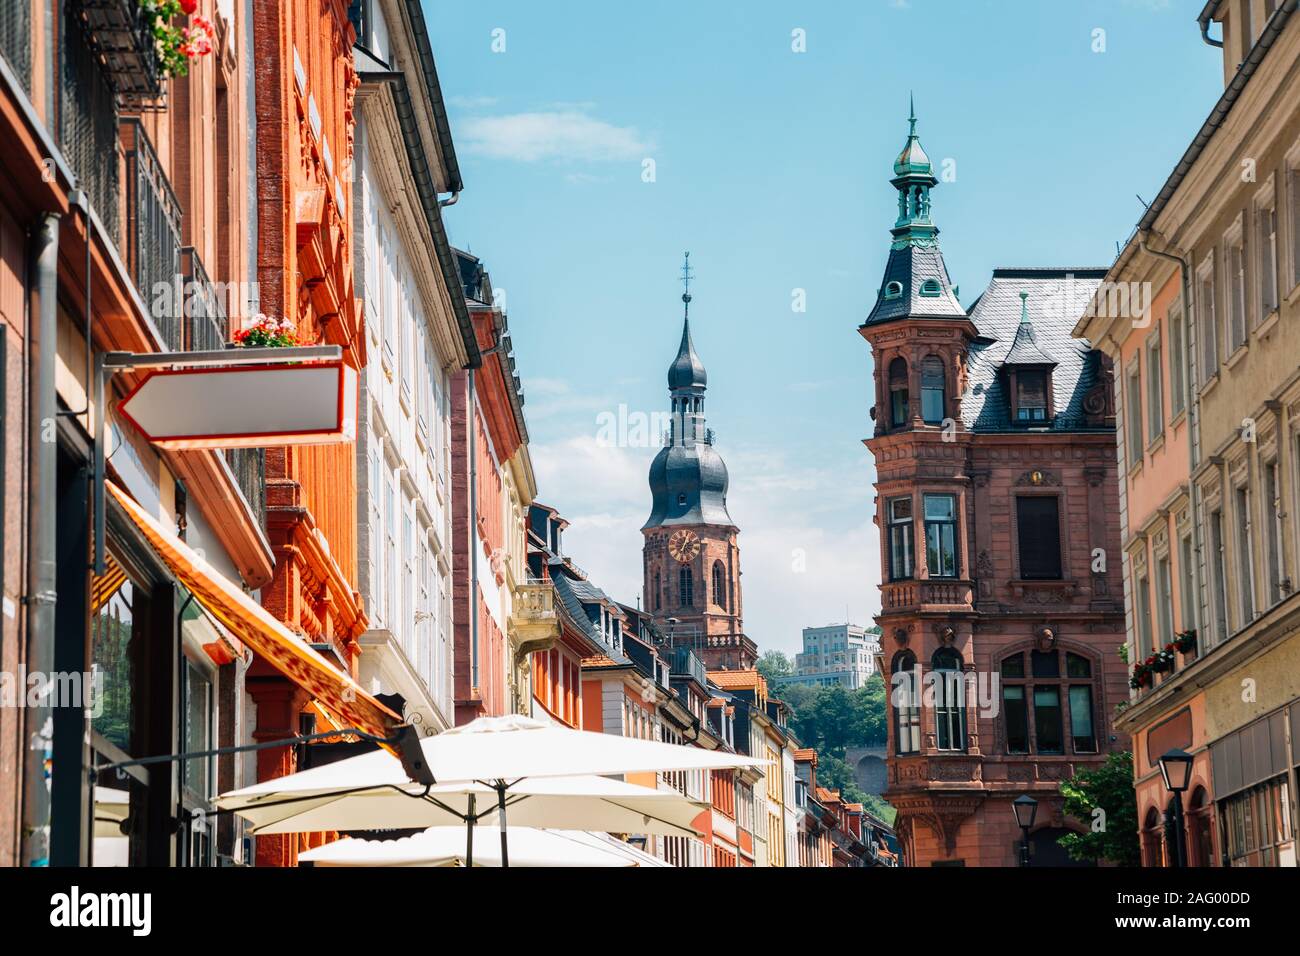 Old town Hauptstrasse main street and Heiliggeistkirche, Church of the Holy Spirit in Heidelberg, Germany Stock Photo